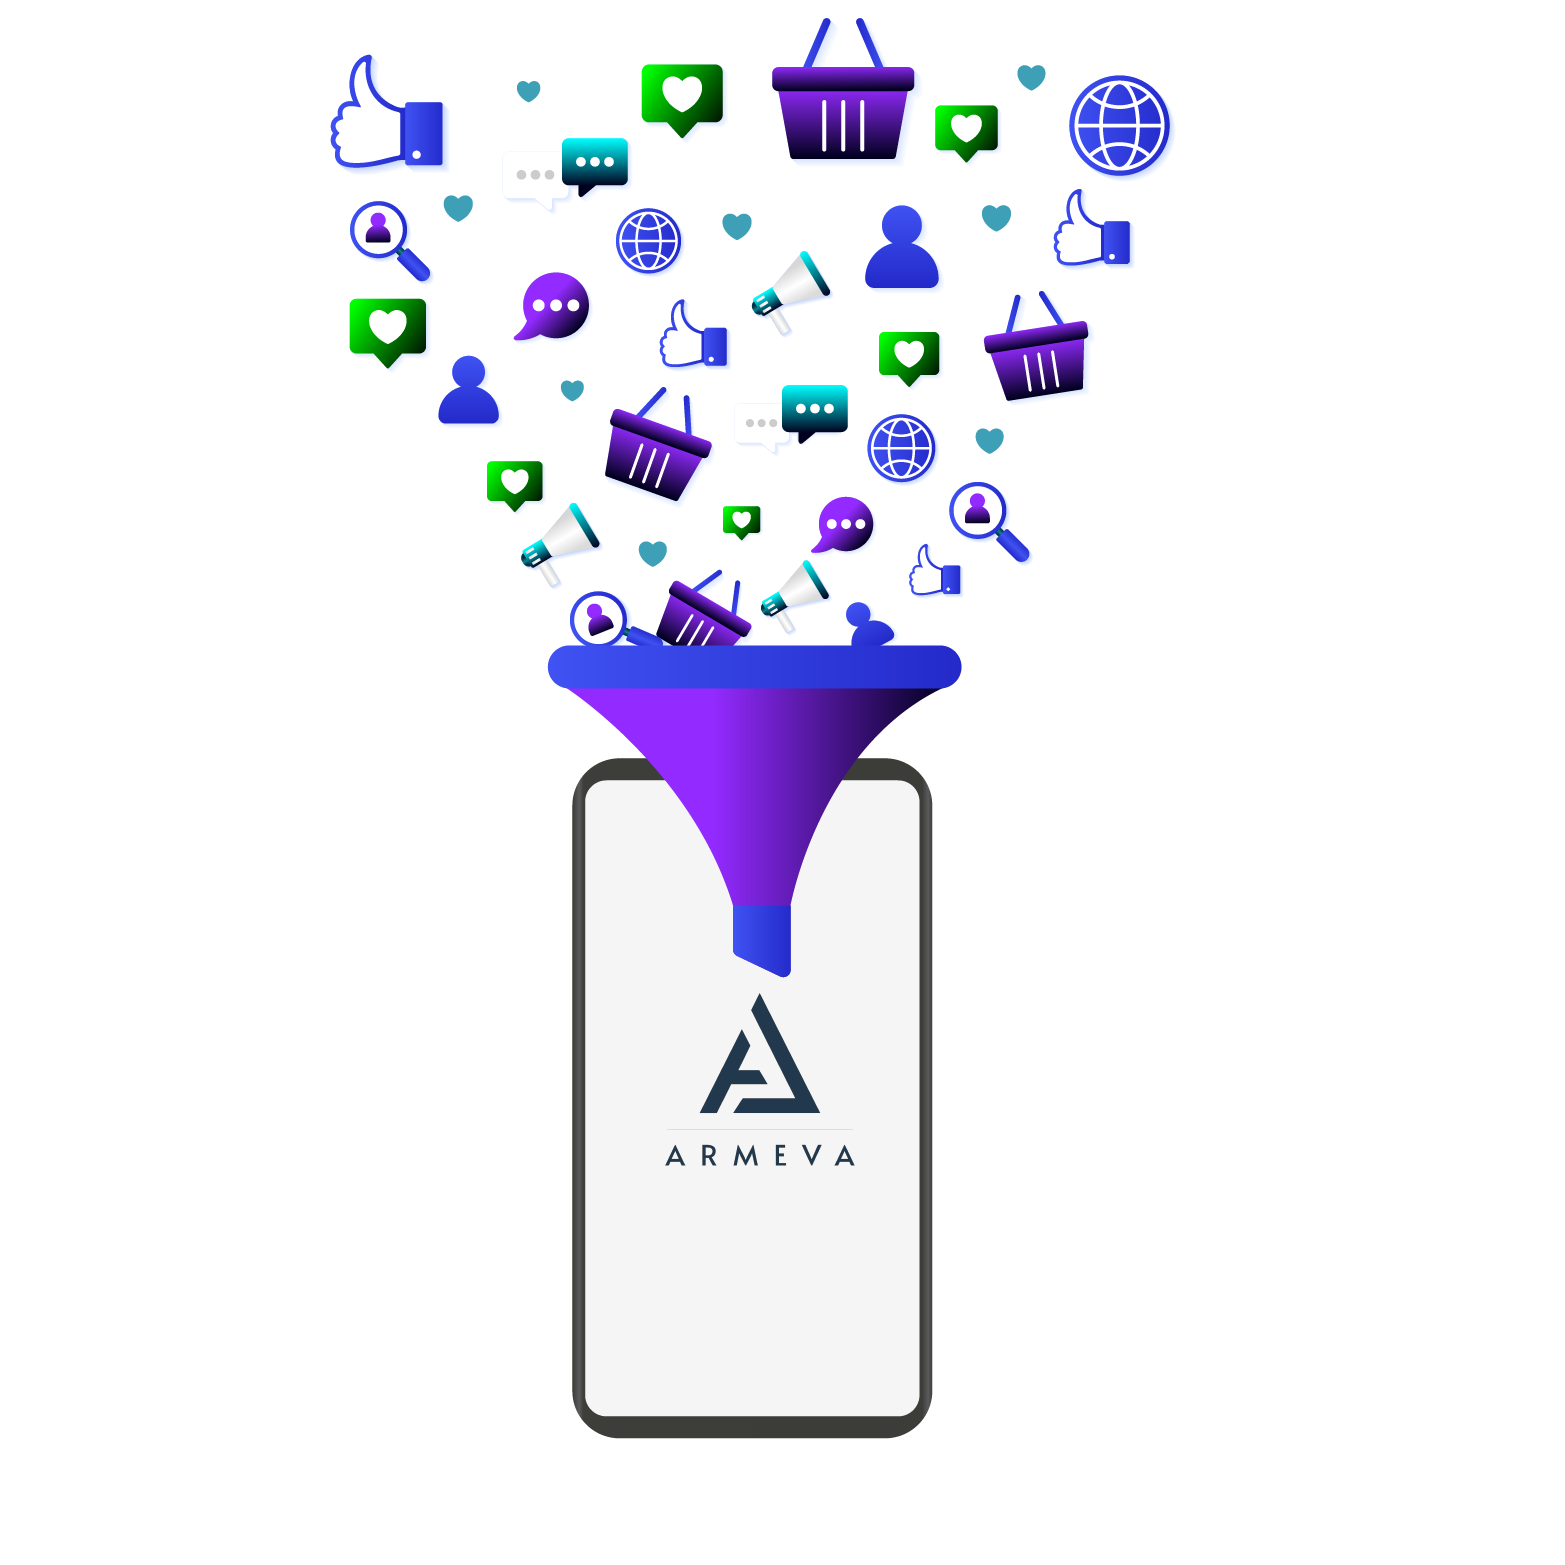 there is a funnel which is showing instead of doing many small things for online marketing you can just use armeva